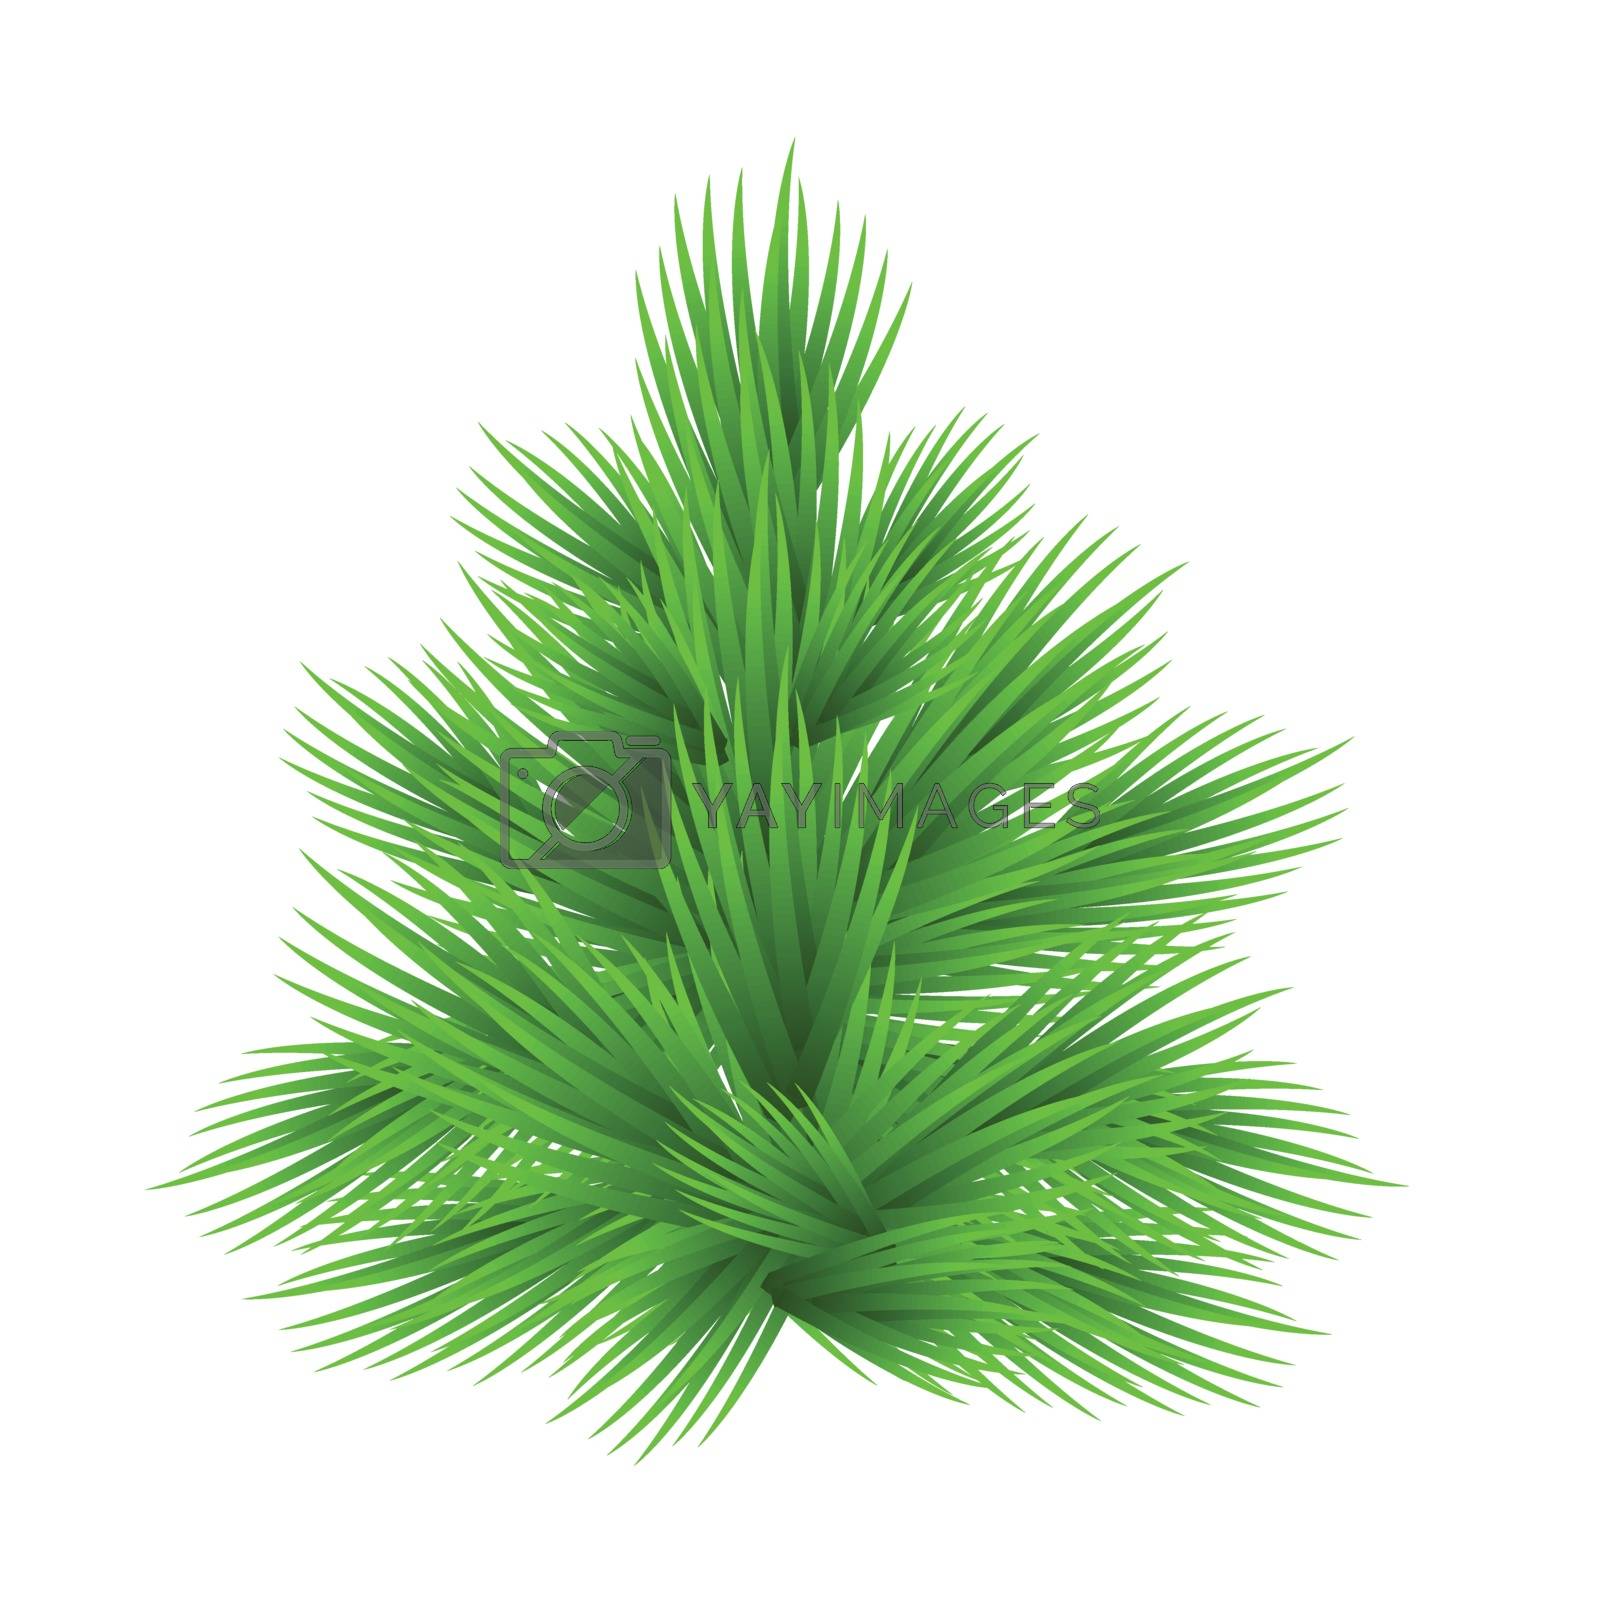 Royalty free image of Lush fir tree Isolated on white vector illustration. by nutela_pancake